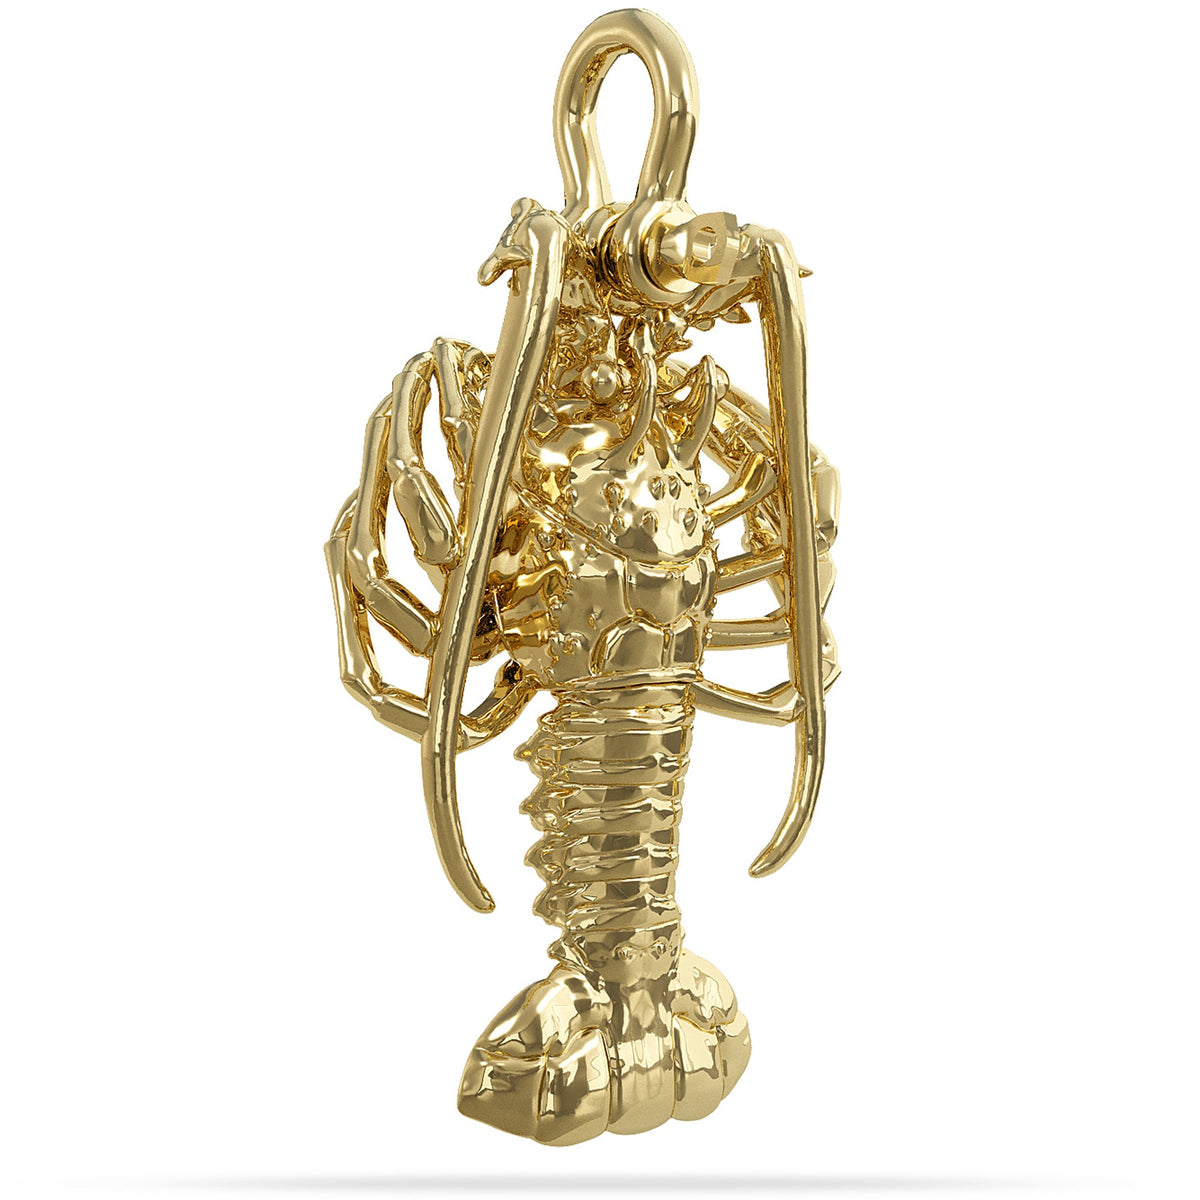 Solid 14k Spiny Florida Lobster Pendant High Polished Mirror Finish With tail Straight Hung on A Mariner Shackle Bail Custom Designed By Nautical Treasure Jewelry In The Florida Keys Islamorada for 2022 Mini Season